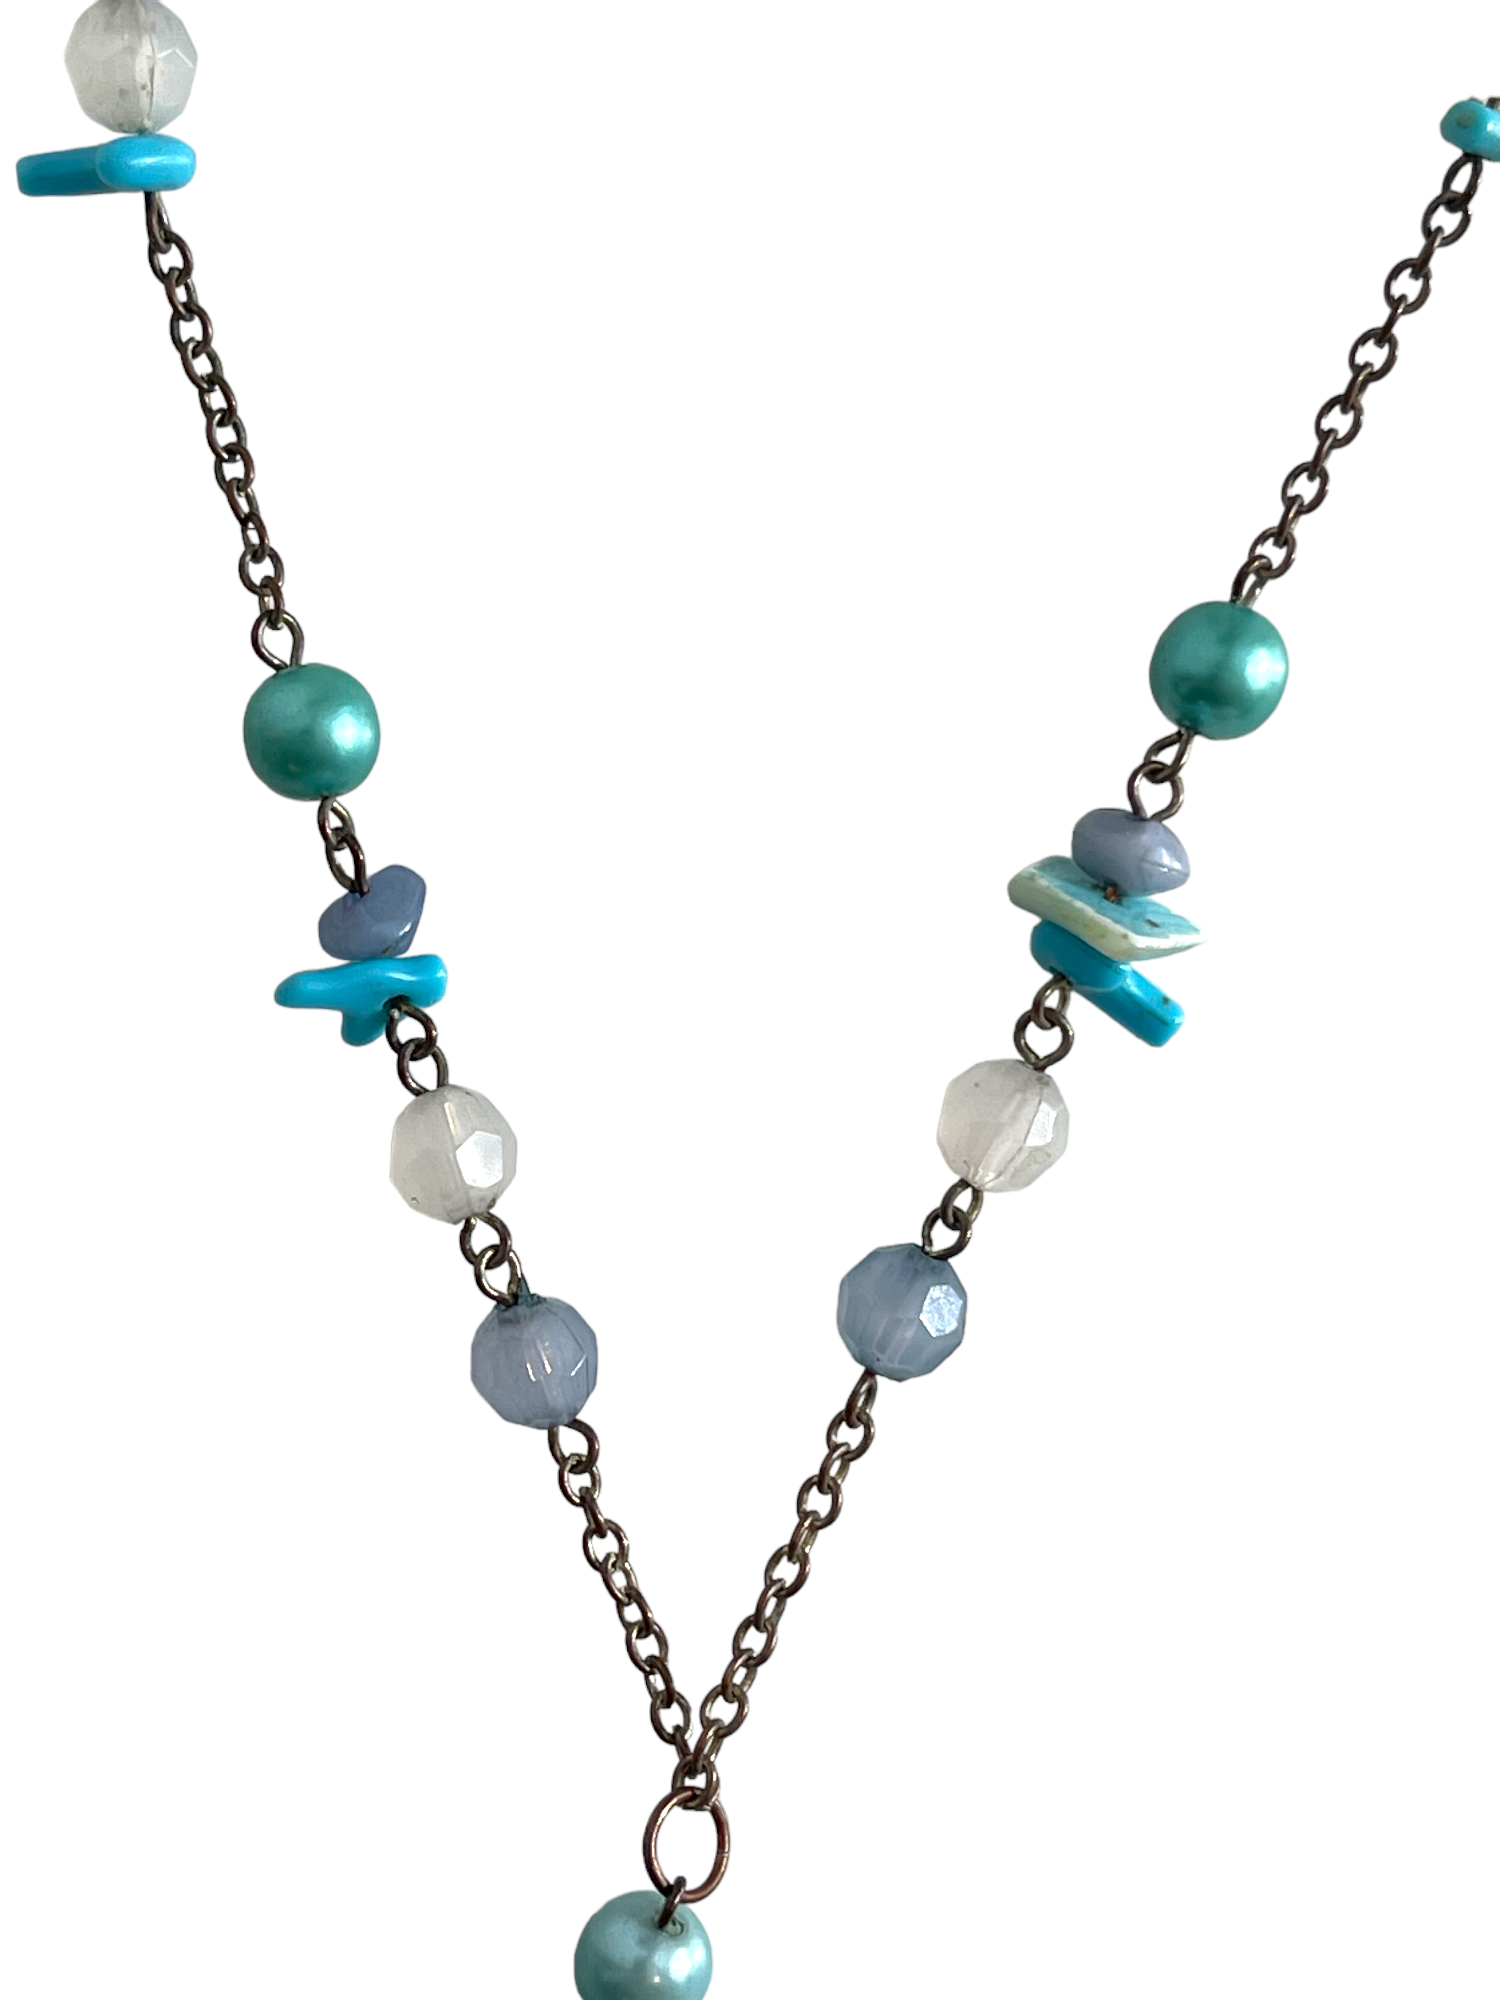 Blue Flower & Beads Necklace